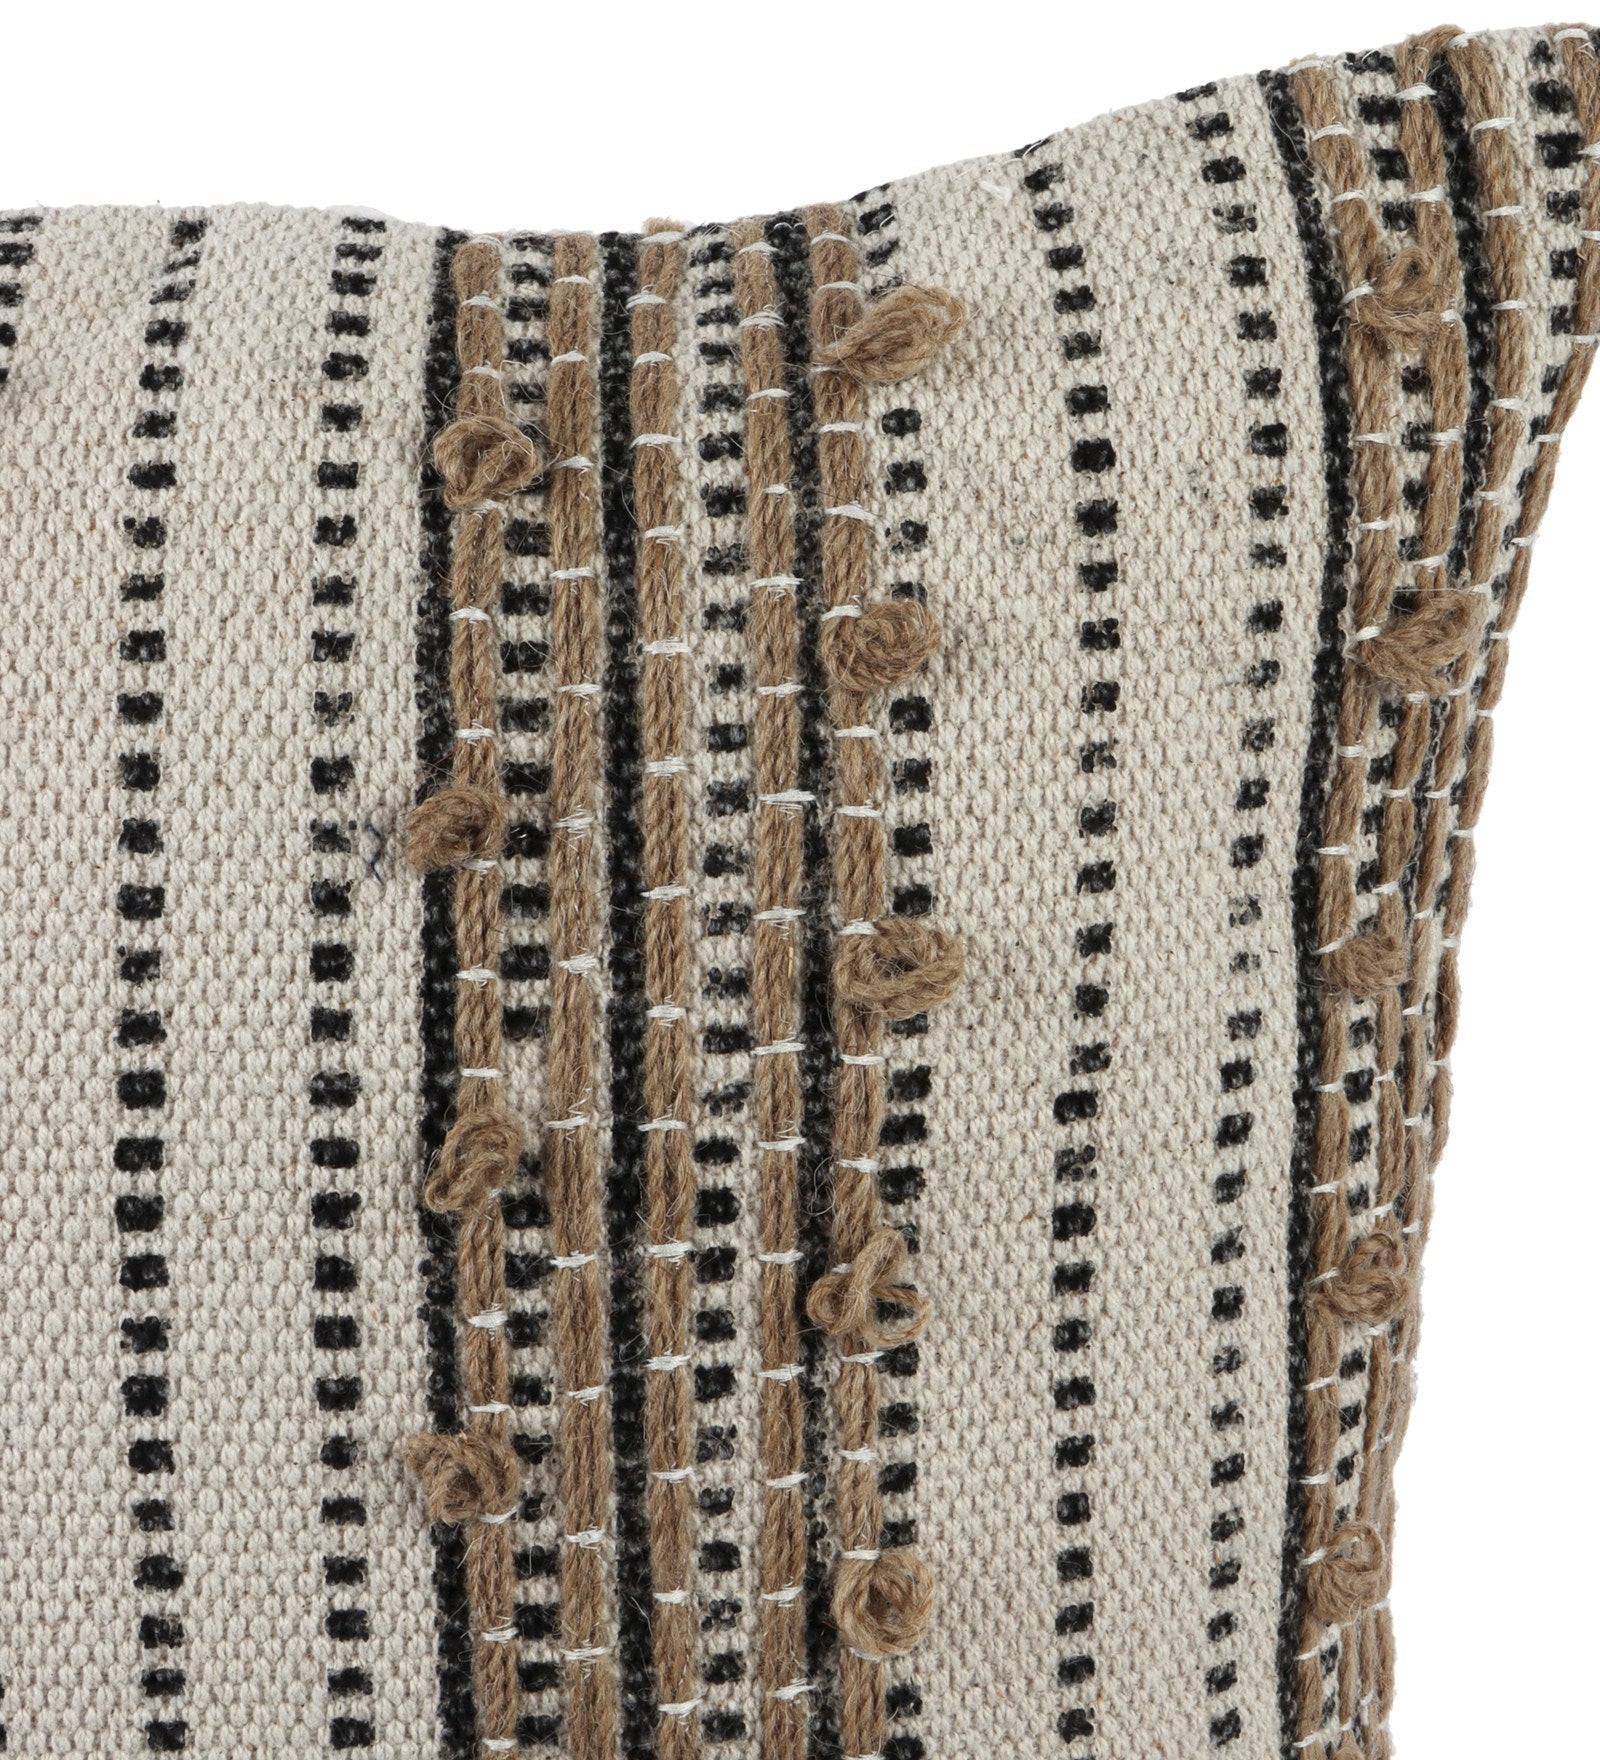 Embroidered Contemporary Cushion Cover (Beige Knots)